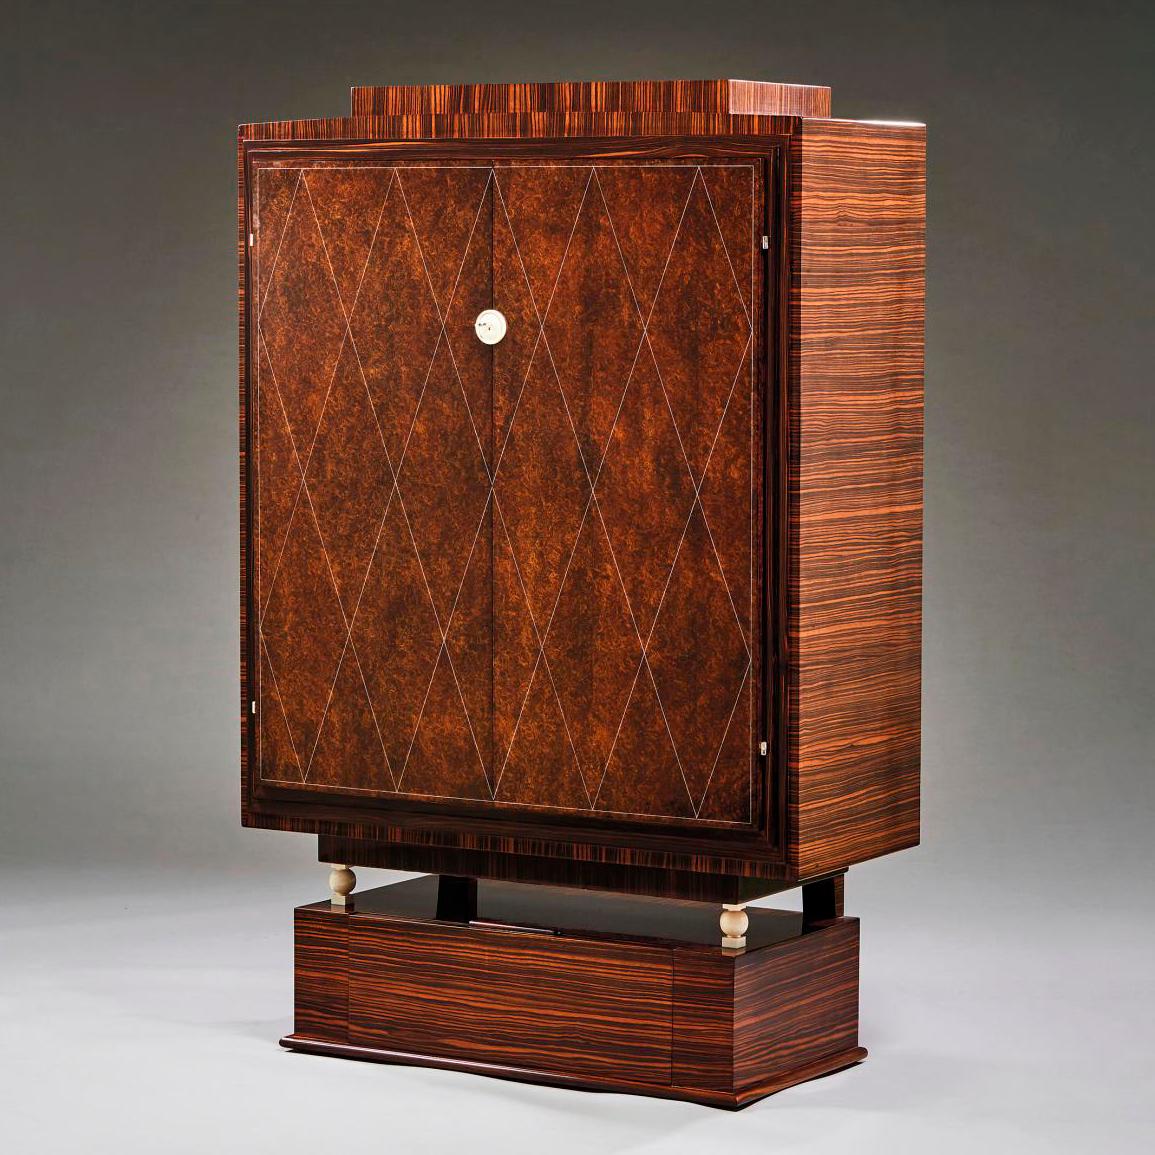 Collector's Cabinet by Jacques-Émile Ruhlmann - Lots sold